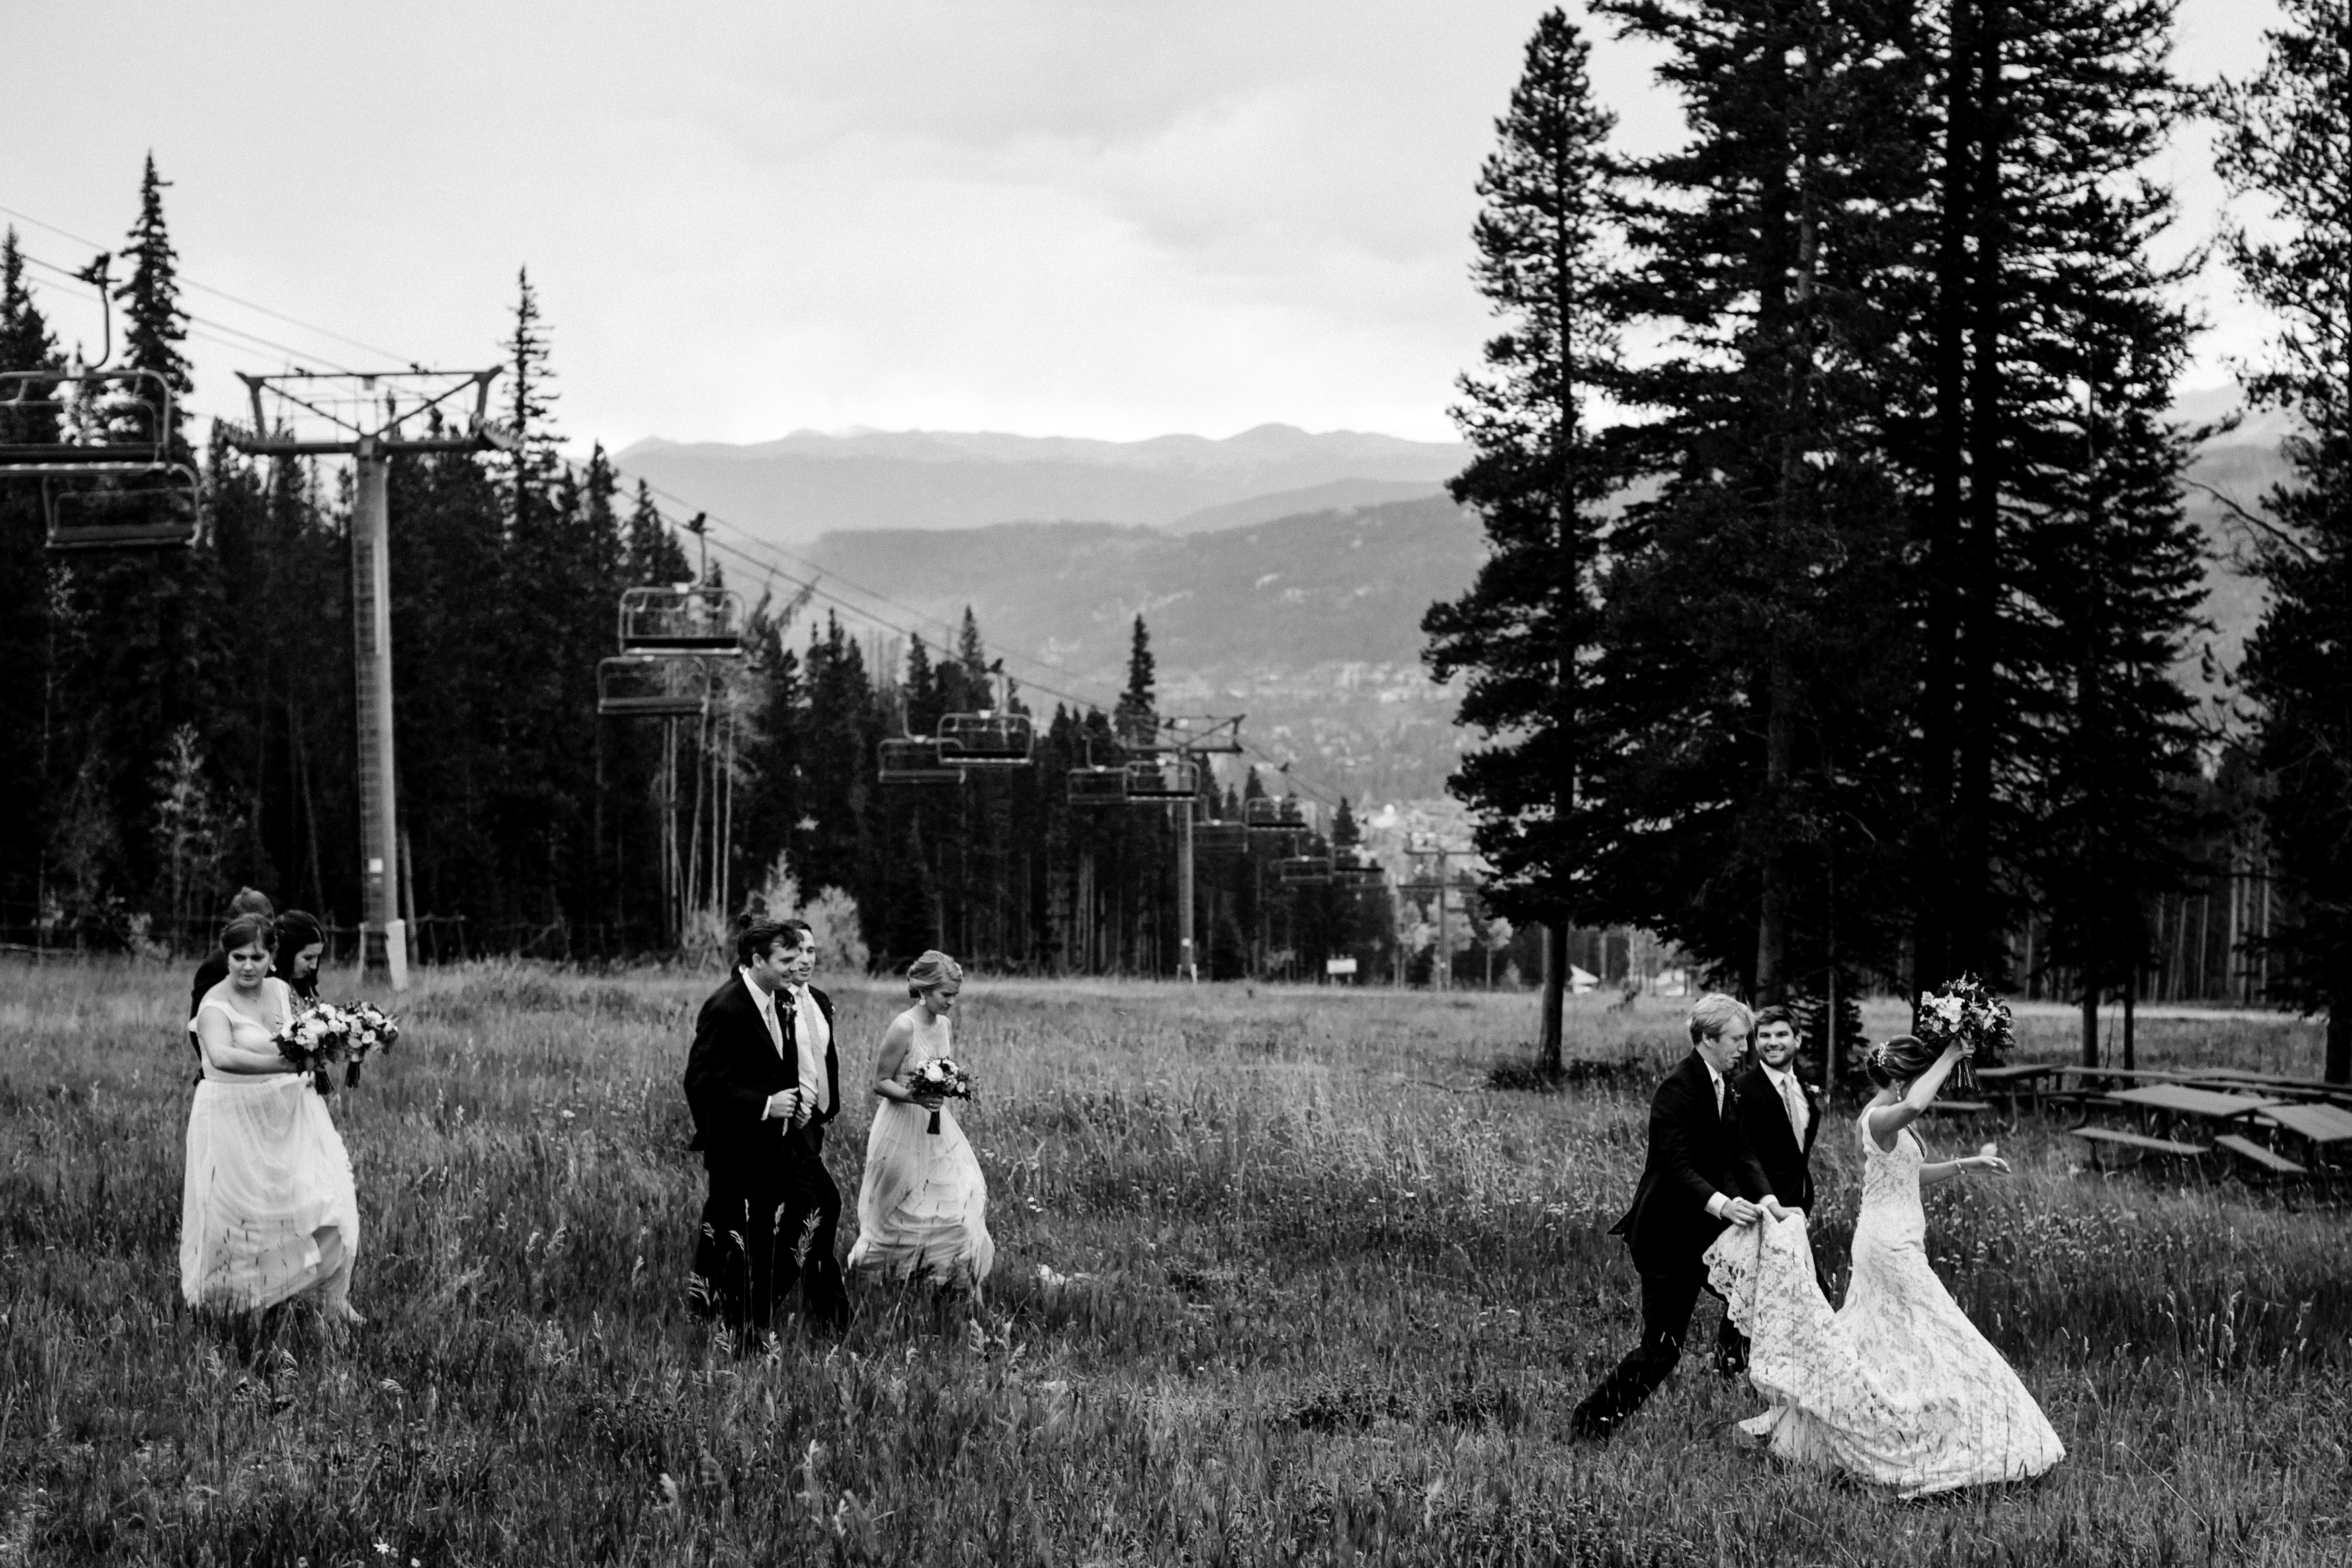 The wedding party on the ski slopes of Breckenridge just before Justin & Katie's Tenmile Station Fall Wedding.